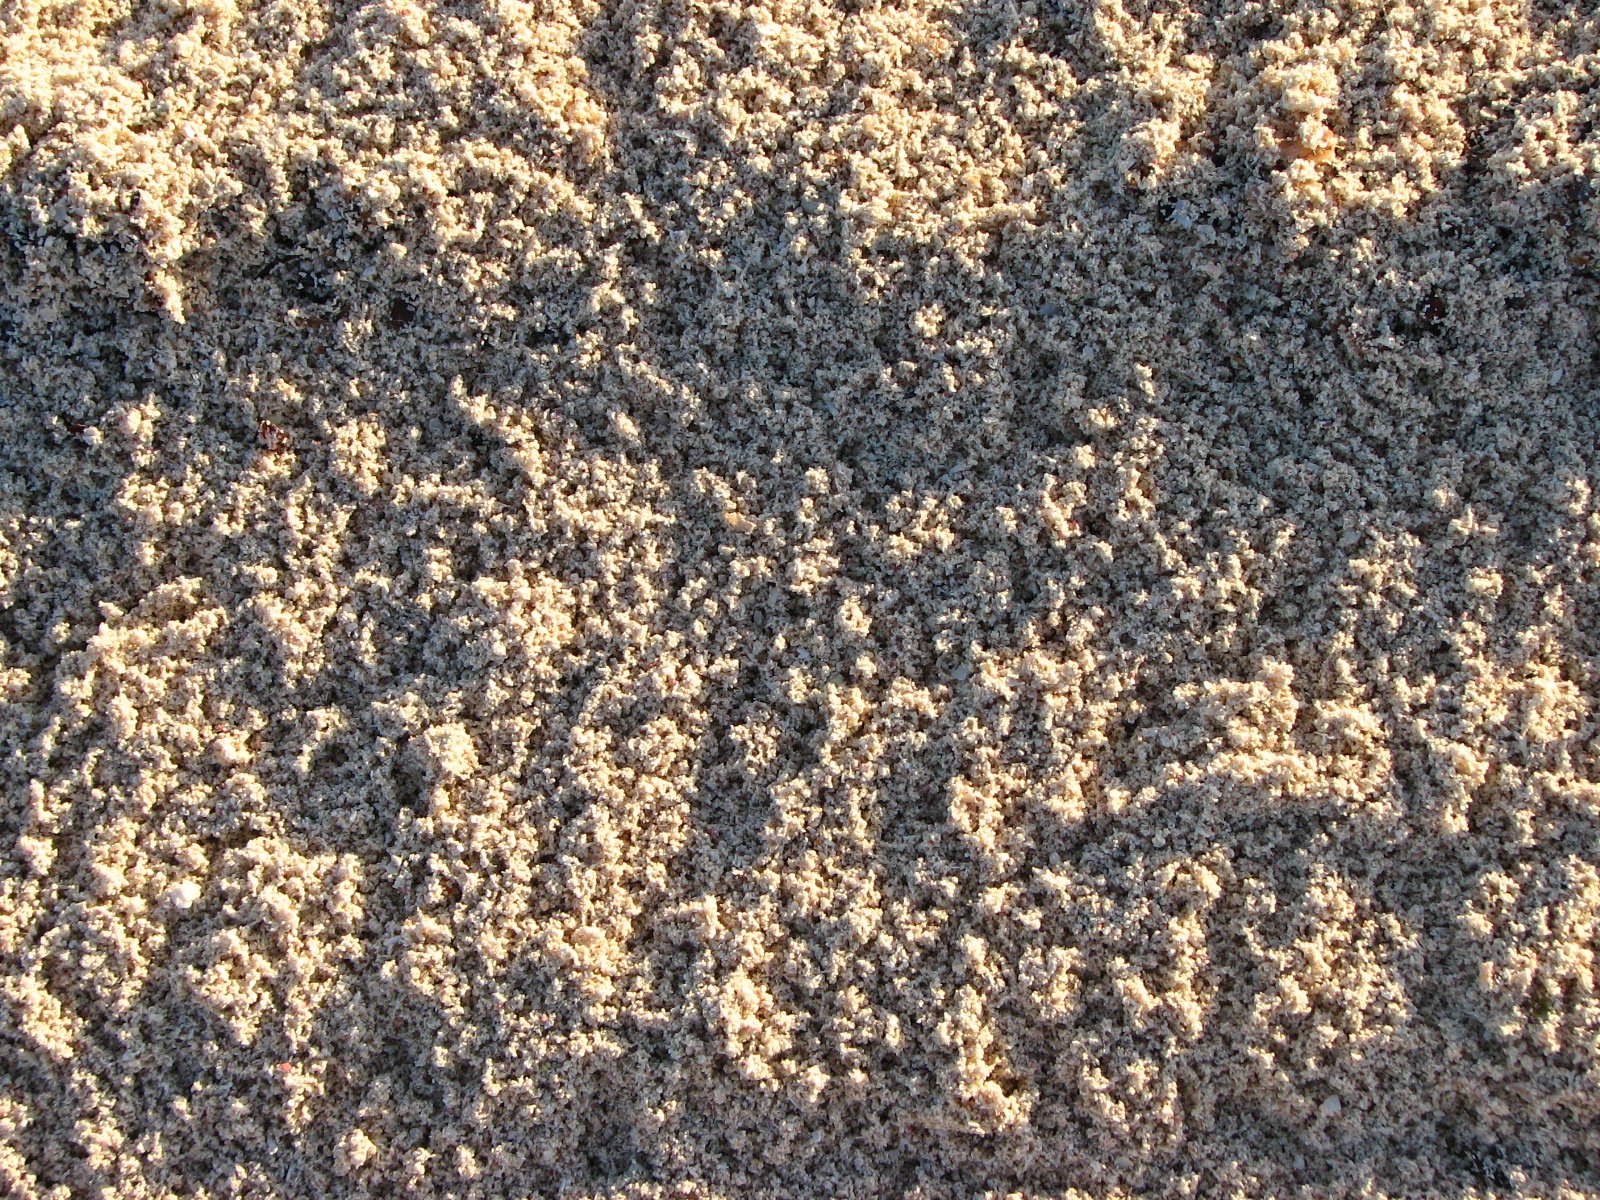 a bird sitting in the middle of a sandy area